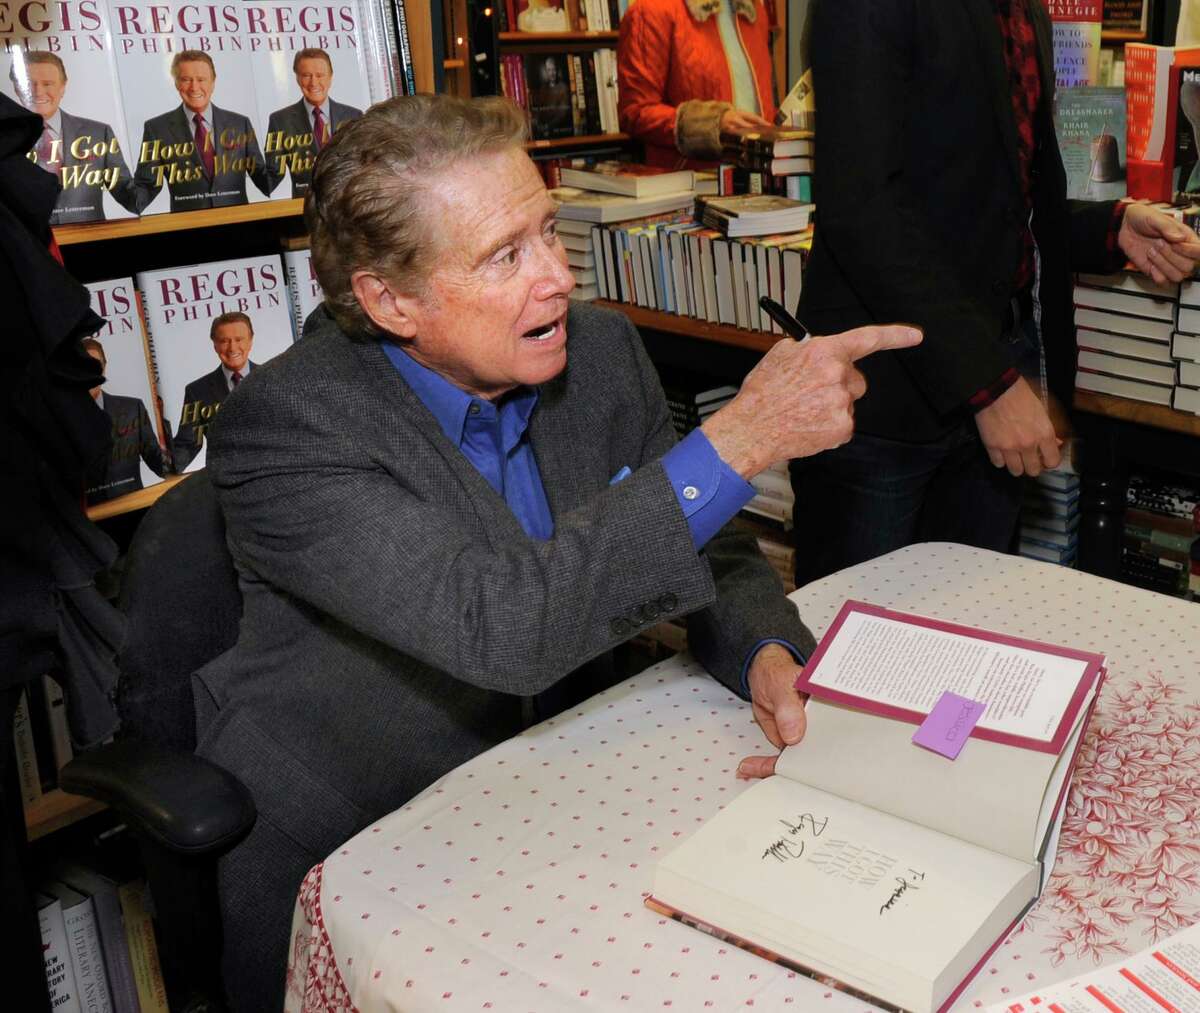 Greenwich resident Regis Philbin signs a copy of his new memoir "How I Got This Way," during an appearance at Diane's Books in Greenwich, Saturday afternoon, Dec. 3, 2011.